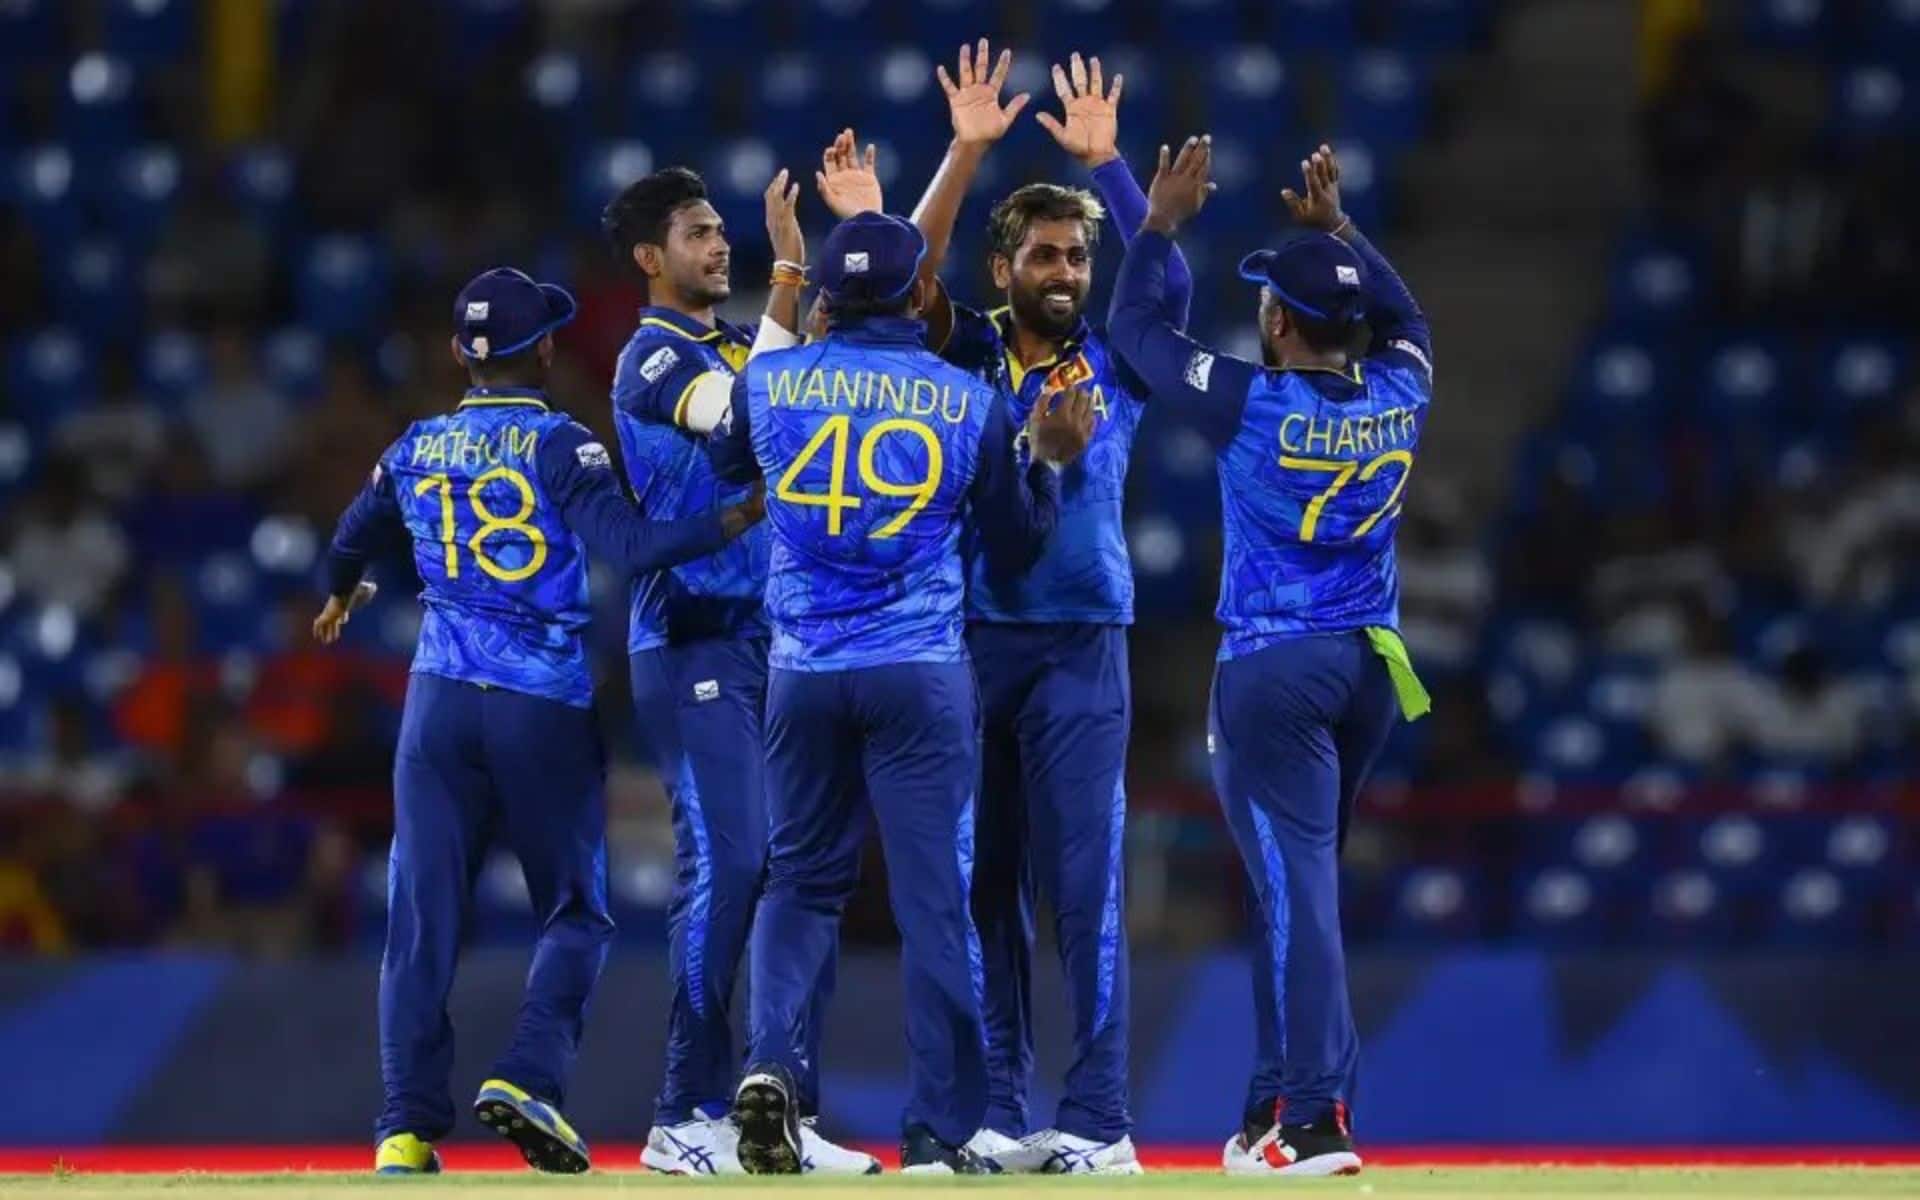  Late Night Clubbing Behind Sri Lanka's Early Exit from T20 WC? Sports Minister Breaks Silence